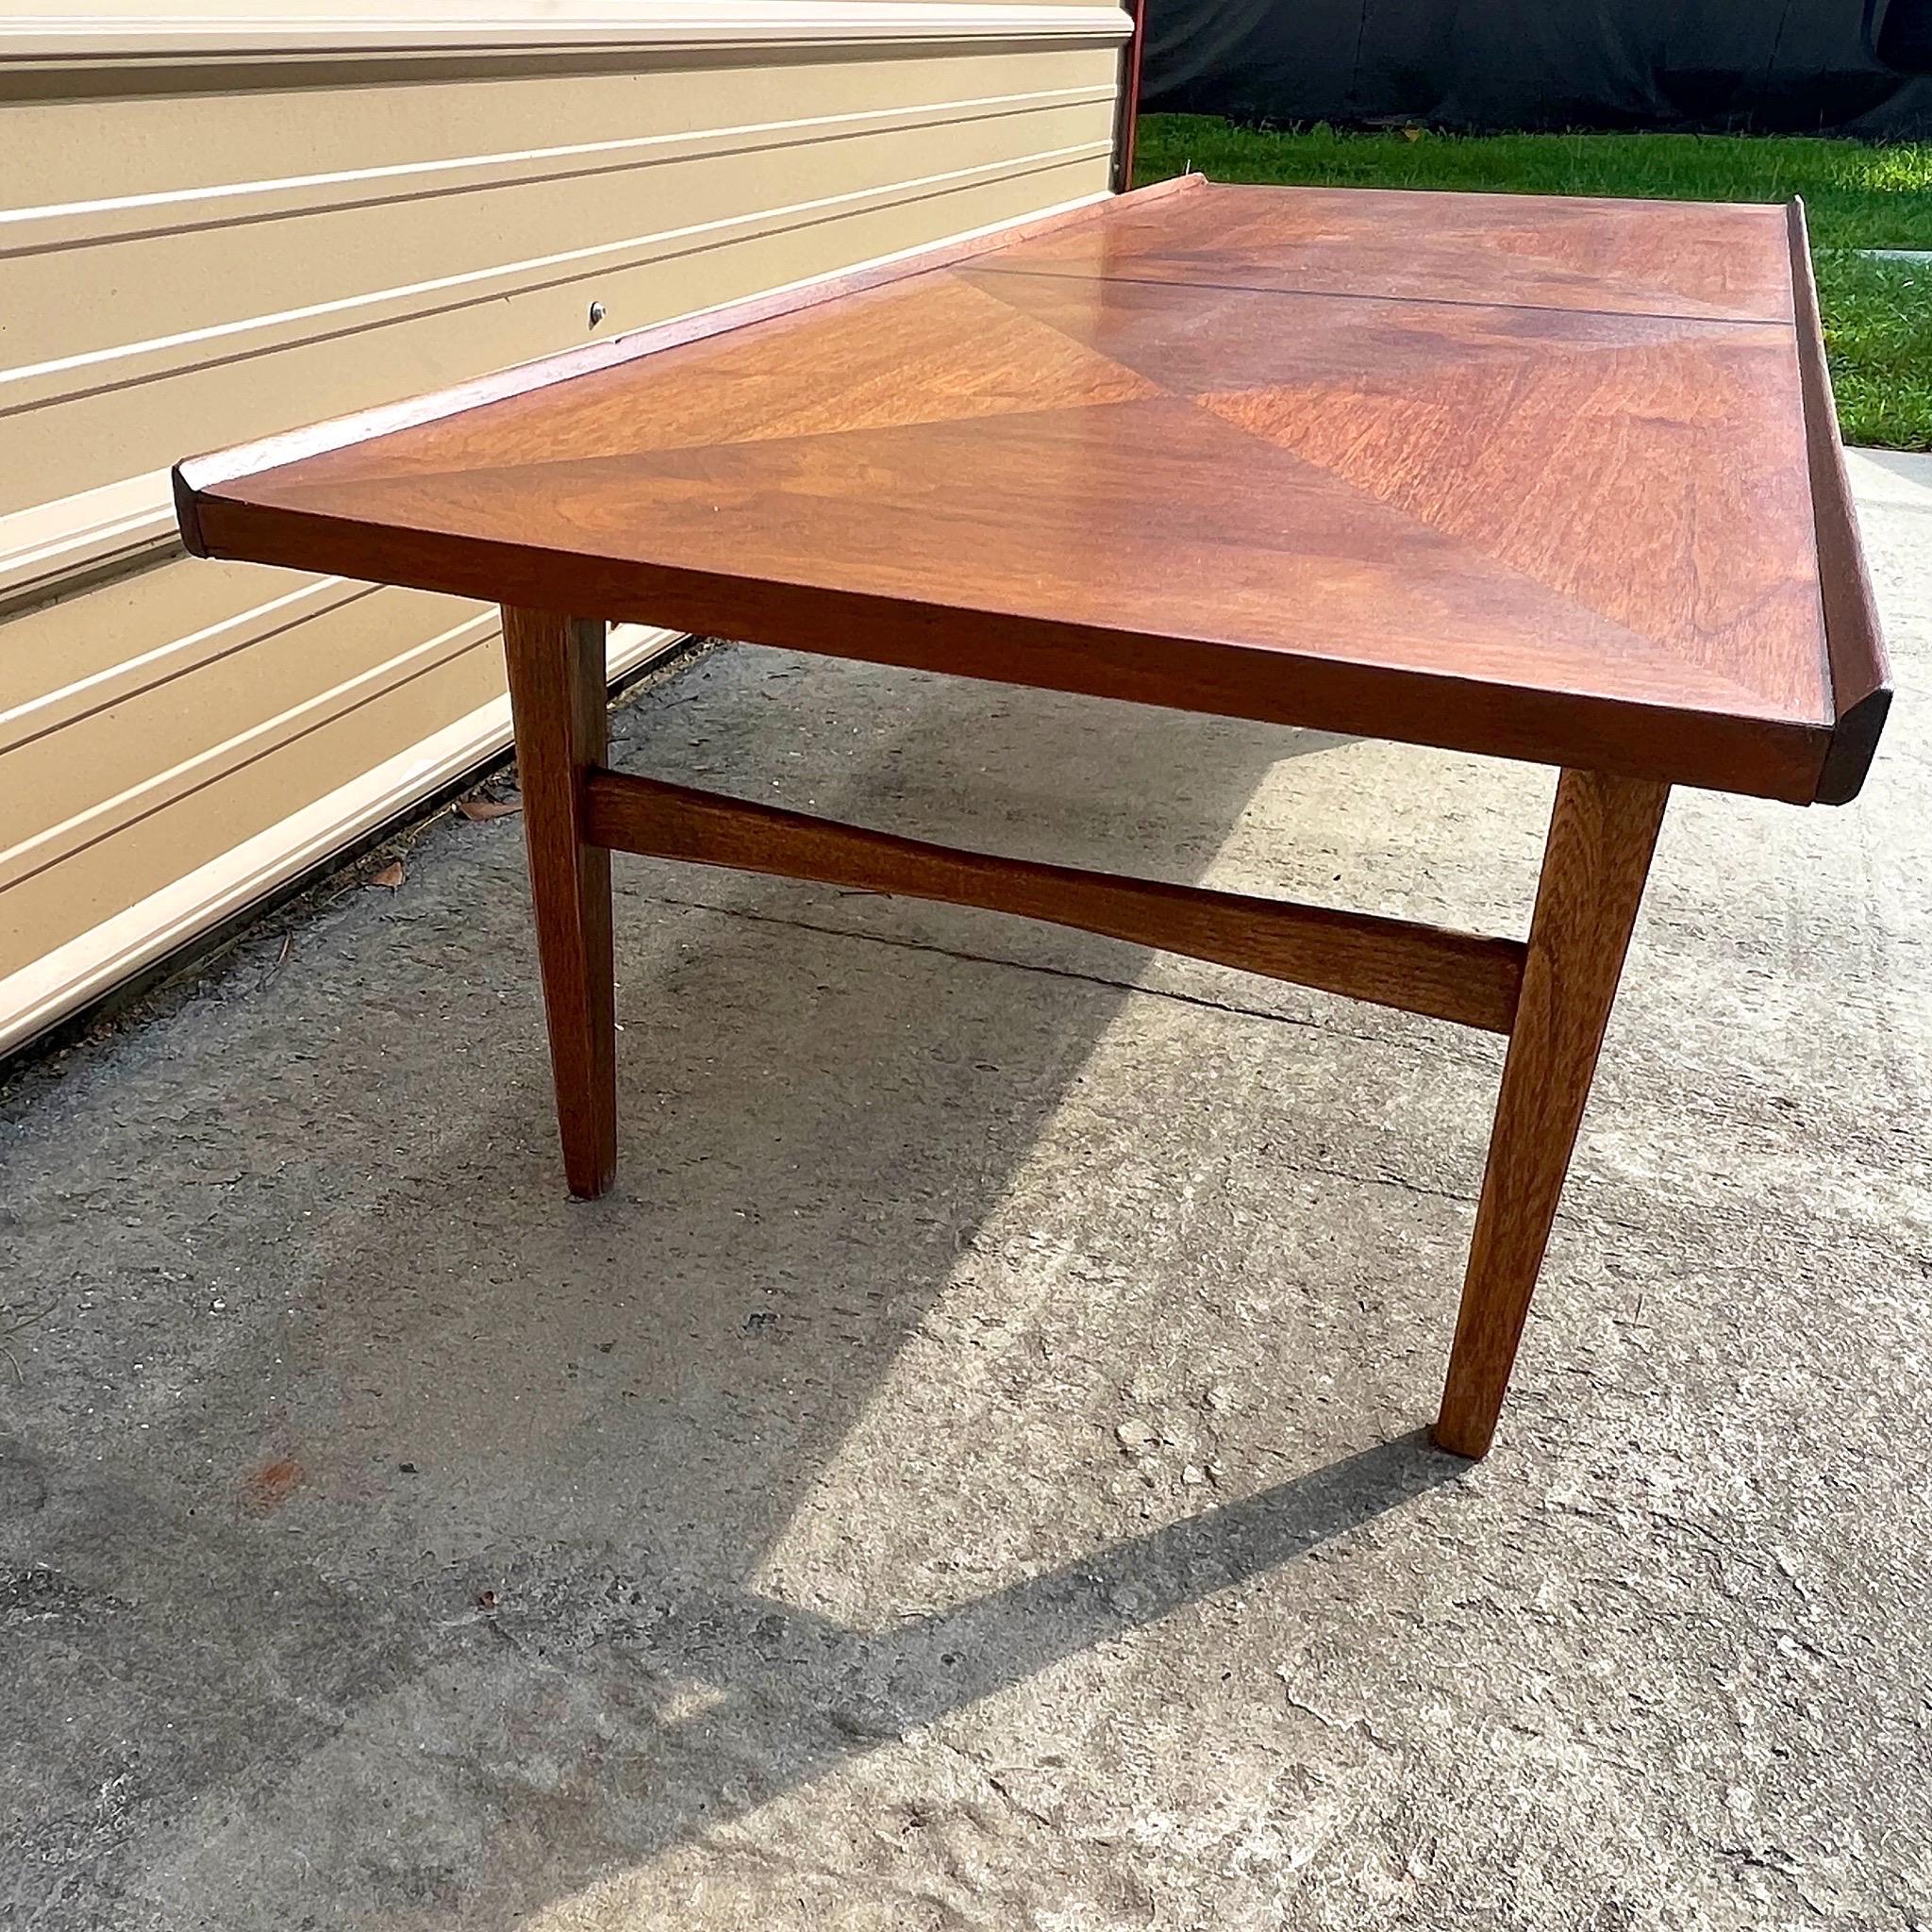 Mid century modern coffee table by American of Martinsville with diamond patterned walnut veneer top. This is a long and low table that will pair nicely with a low profile sofa. It's solid and sturdy and in very good vintage condition.